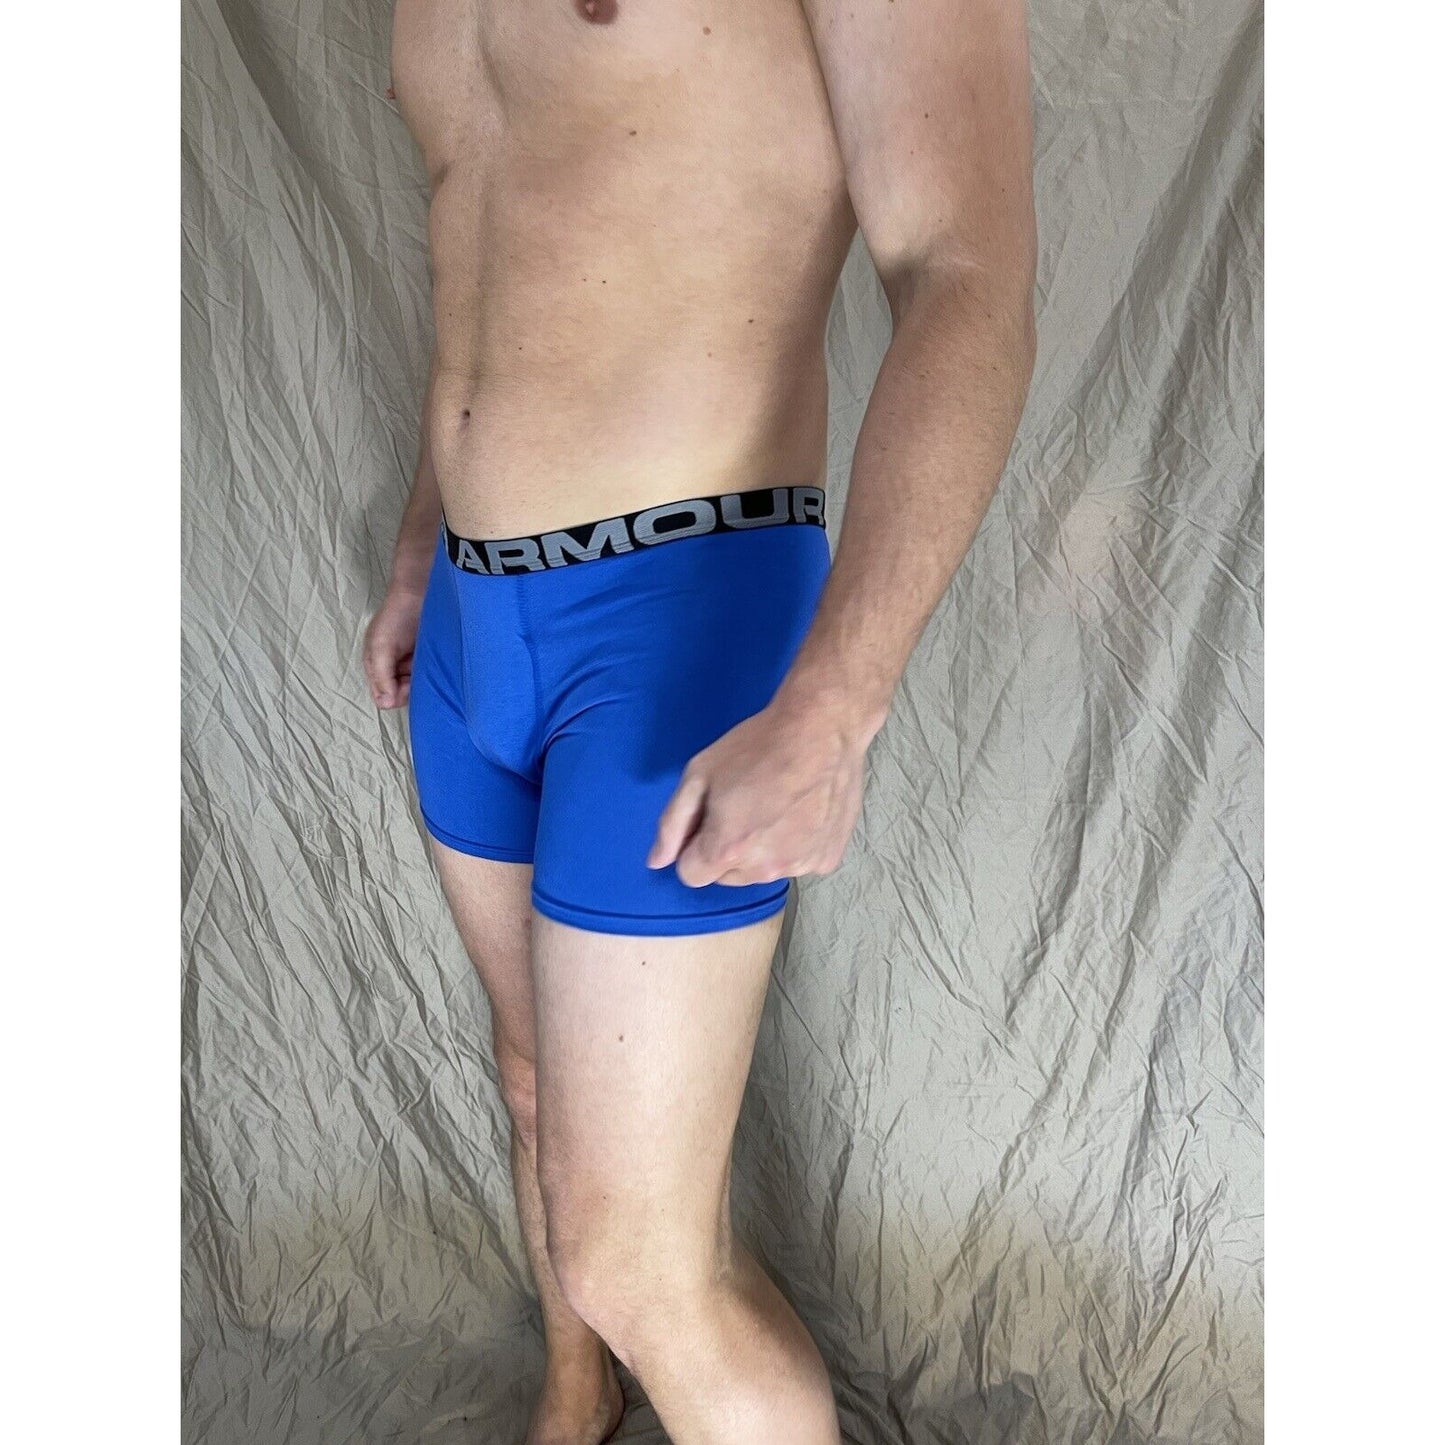 youth XL royal blue under armour fitted heat gear boxer briefs